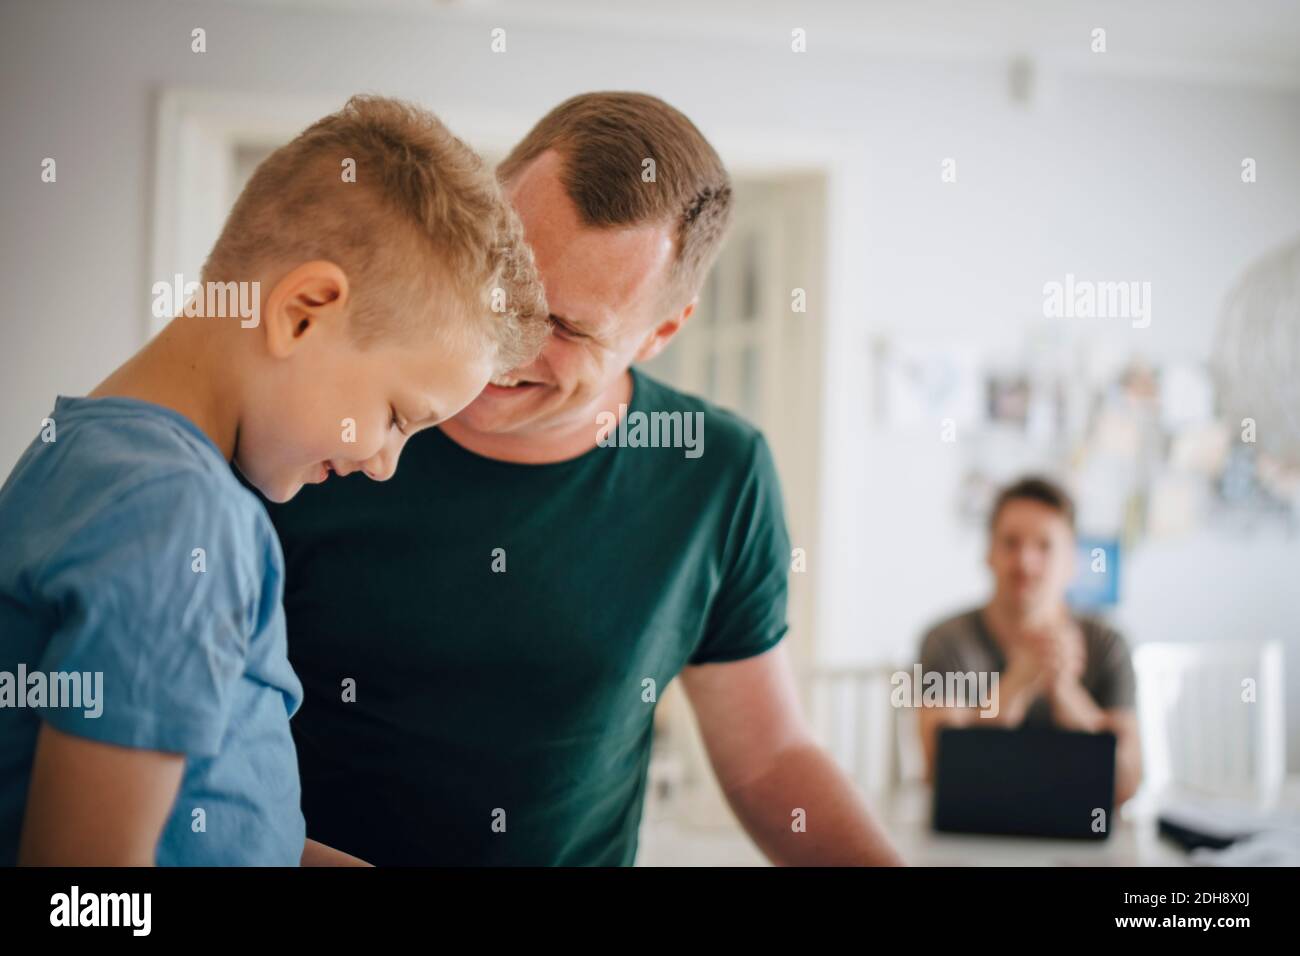 Smiling father looking at son sitting in domestic kitchen Stock Photo